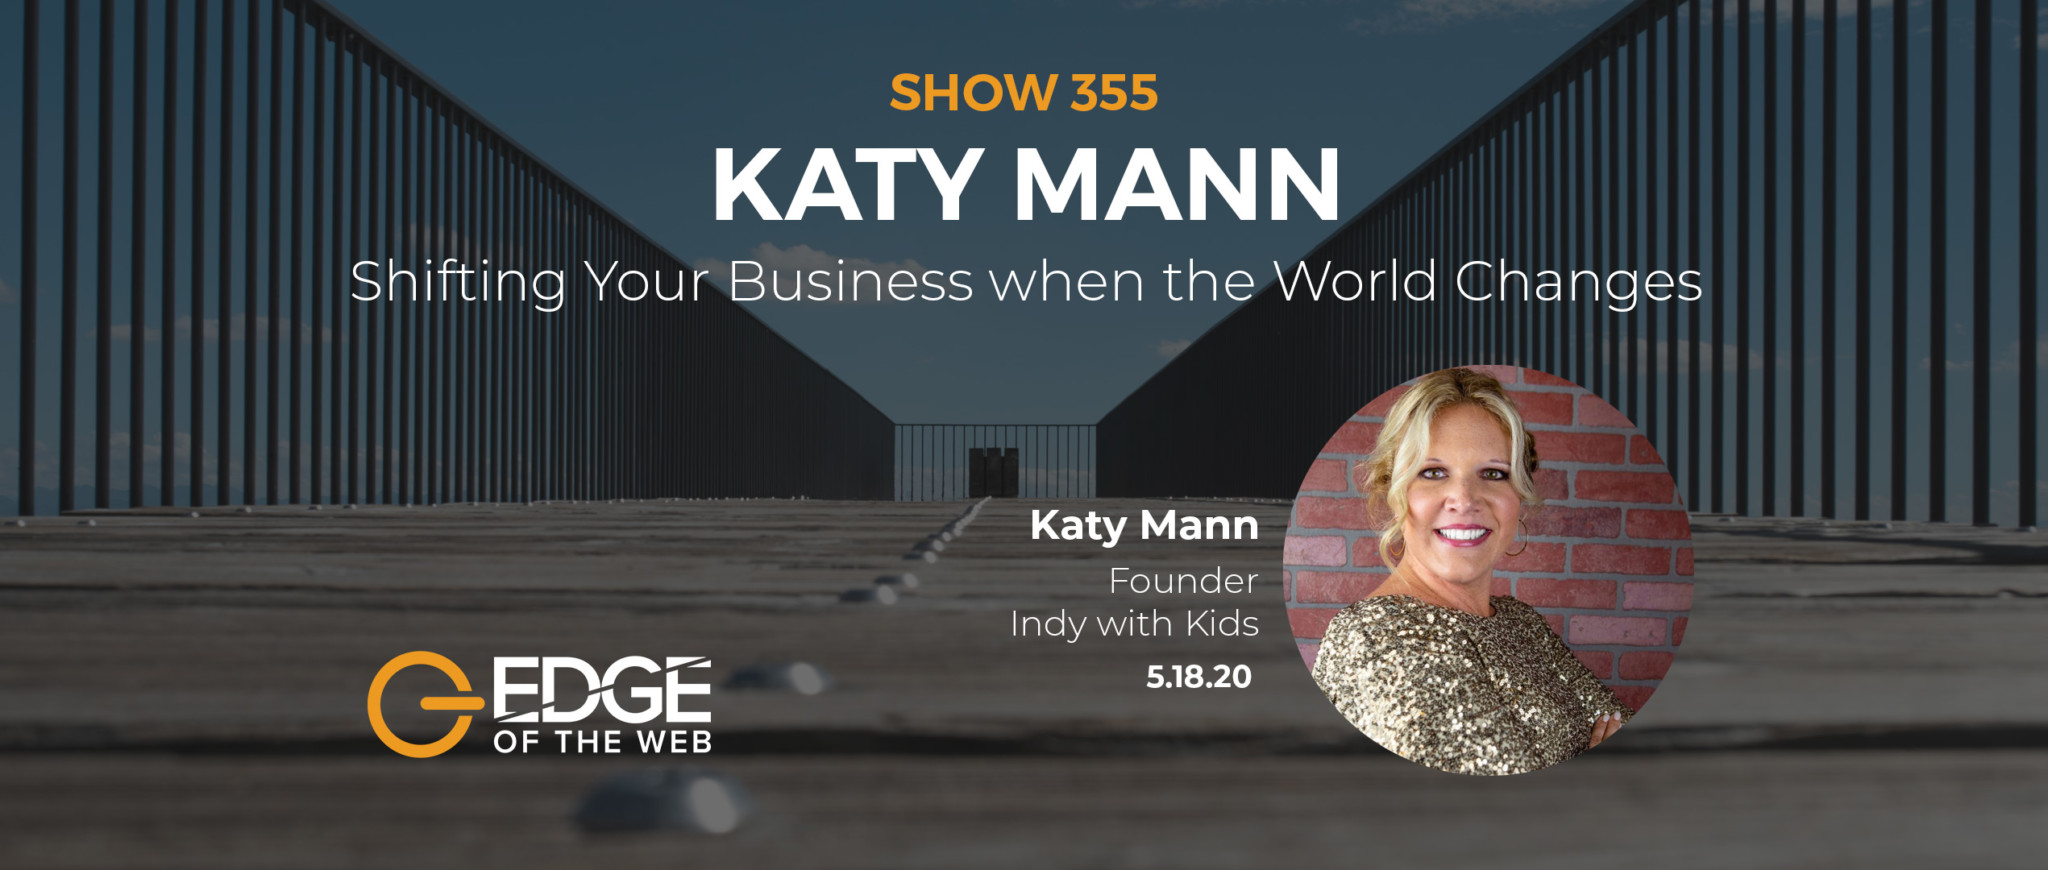 EP 355: Shift Your Business When the World Changes with Katy Mann